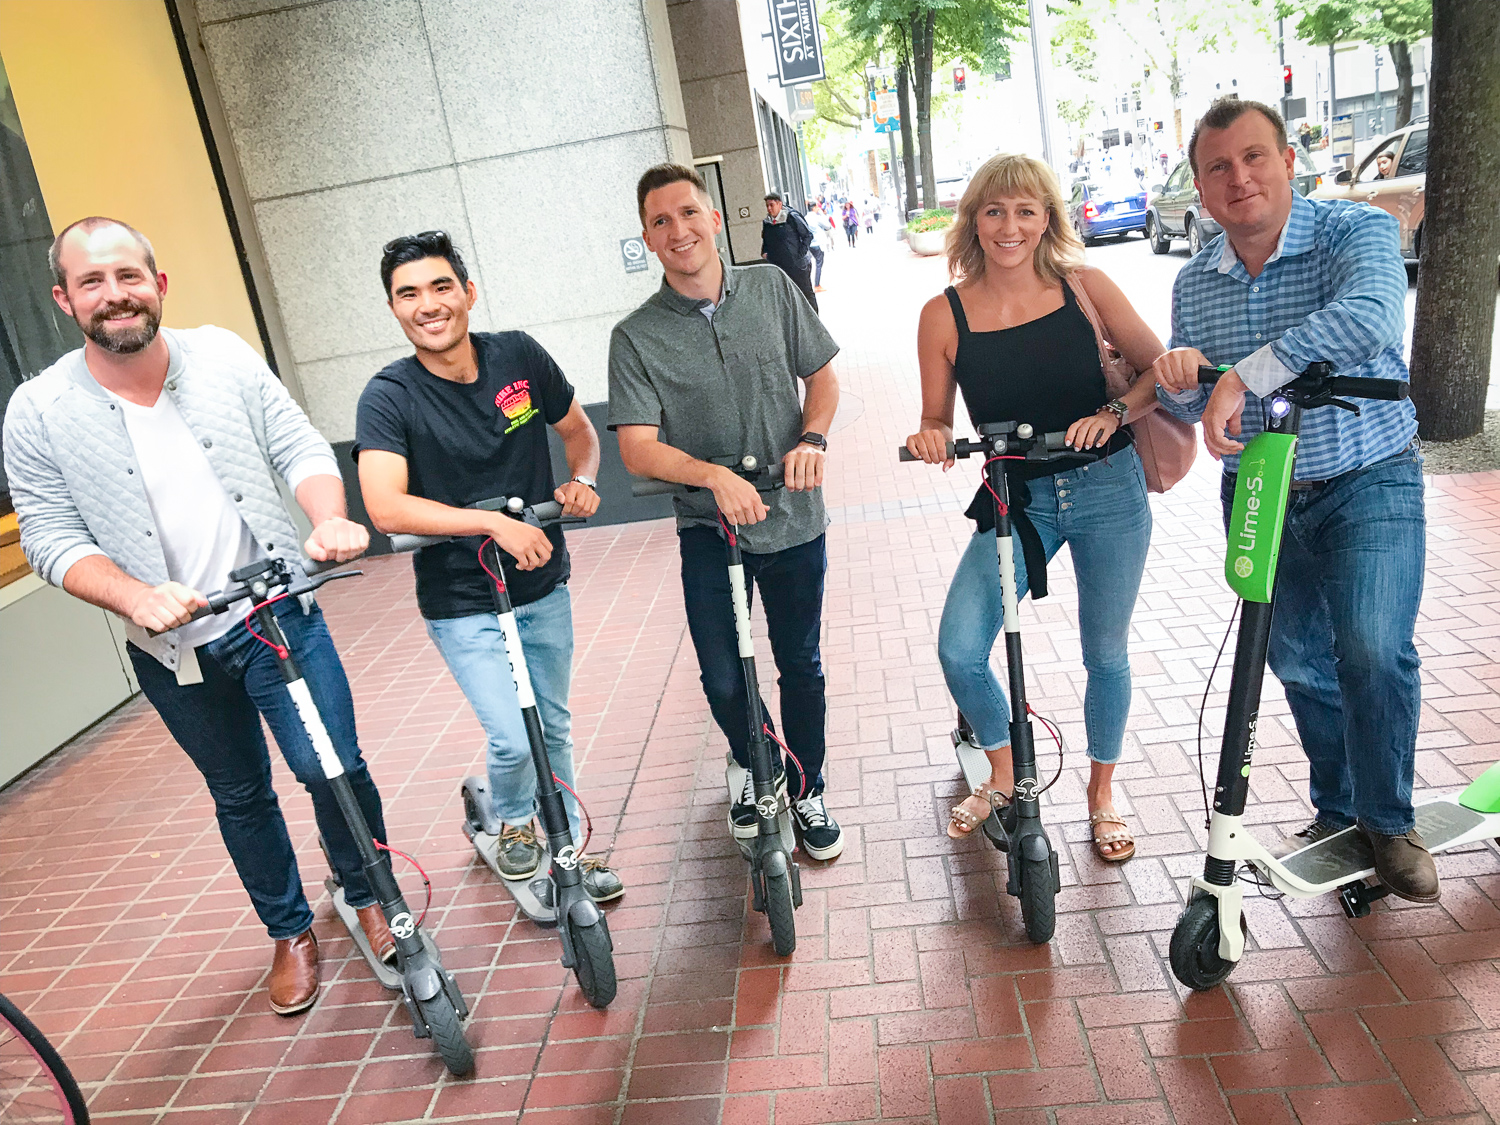 Opinion: Helmets, sidewalks, Segways, other thoughts on e-scooters